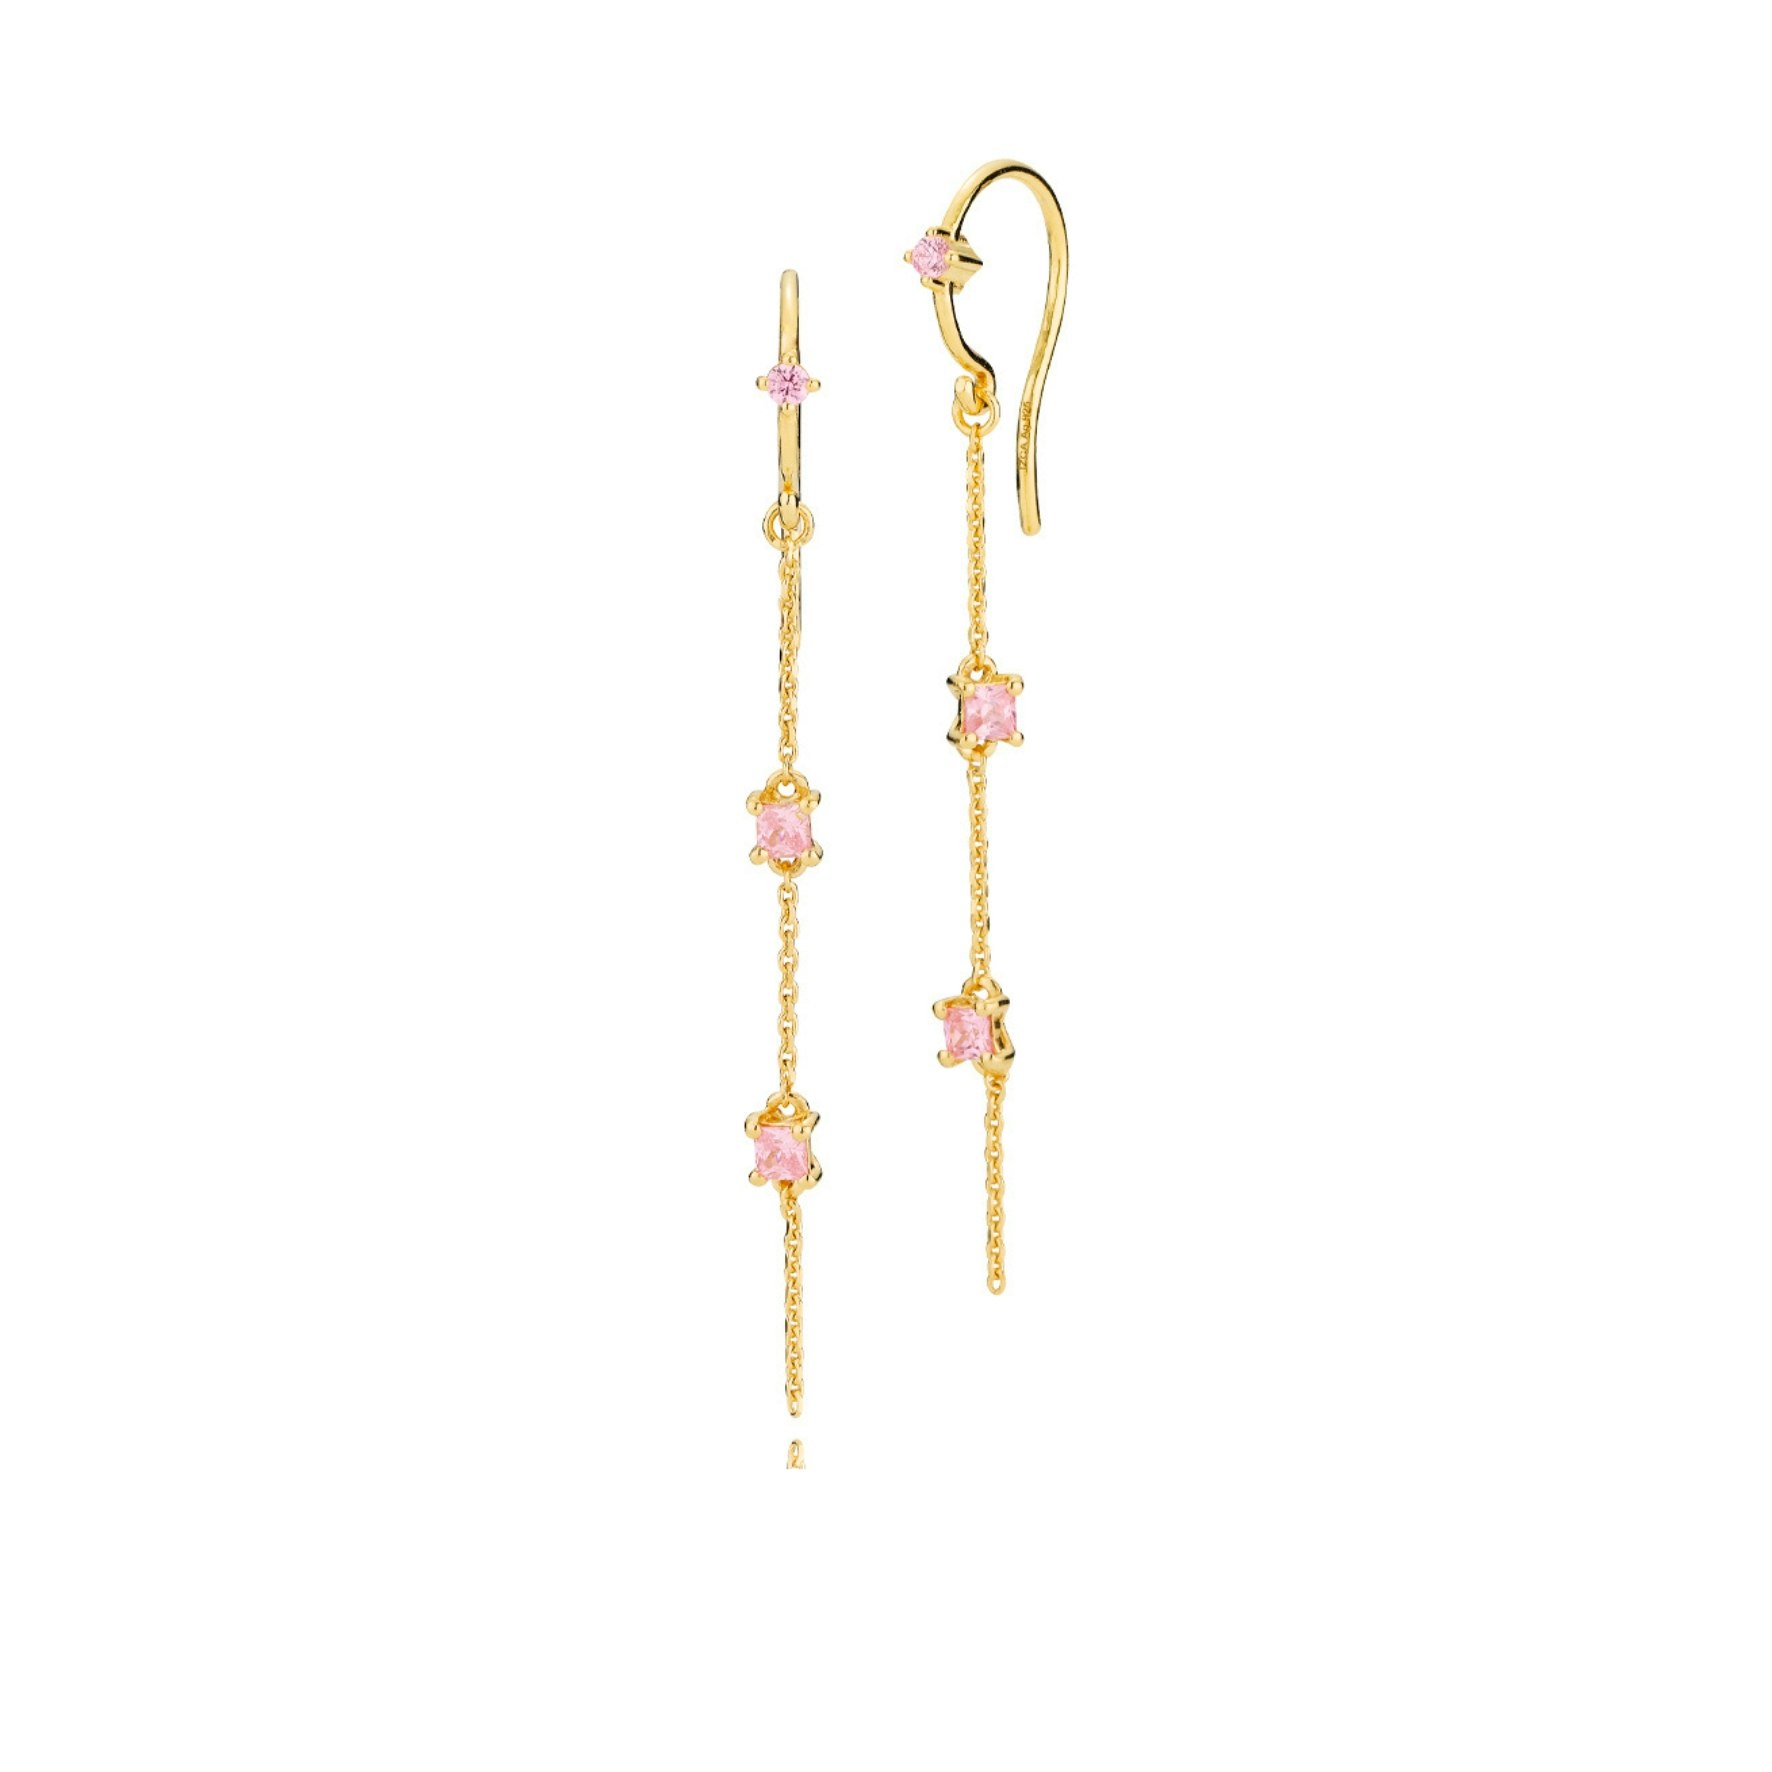 Angelina Pink Chain Earrings from Izabel Camille in Goldplated Silver Sterling 925